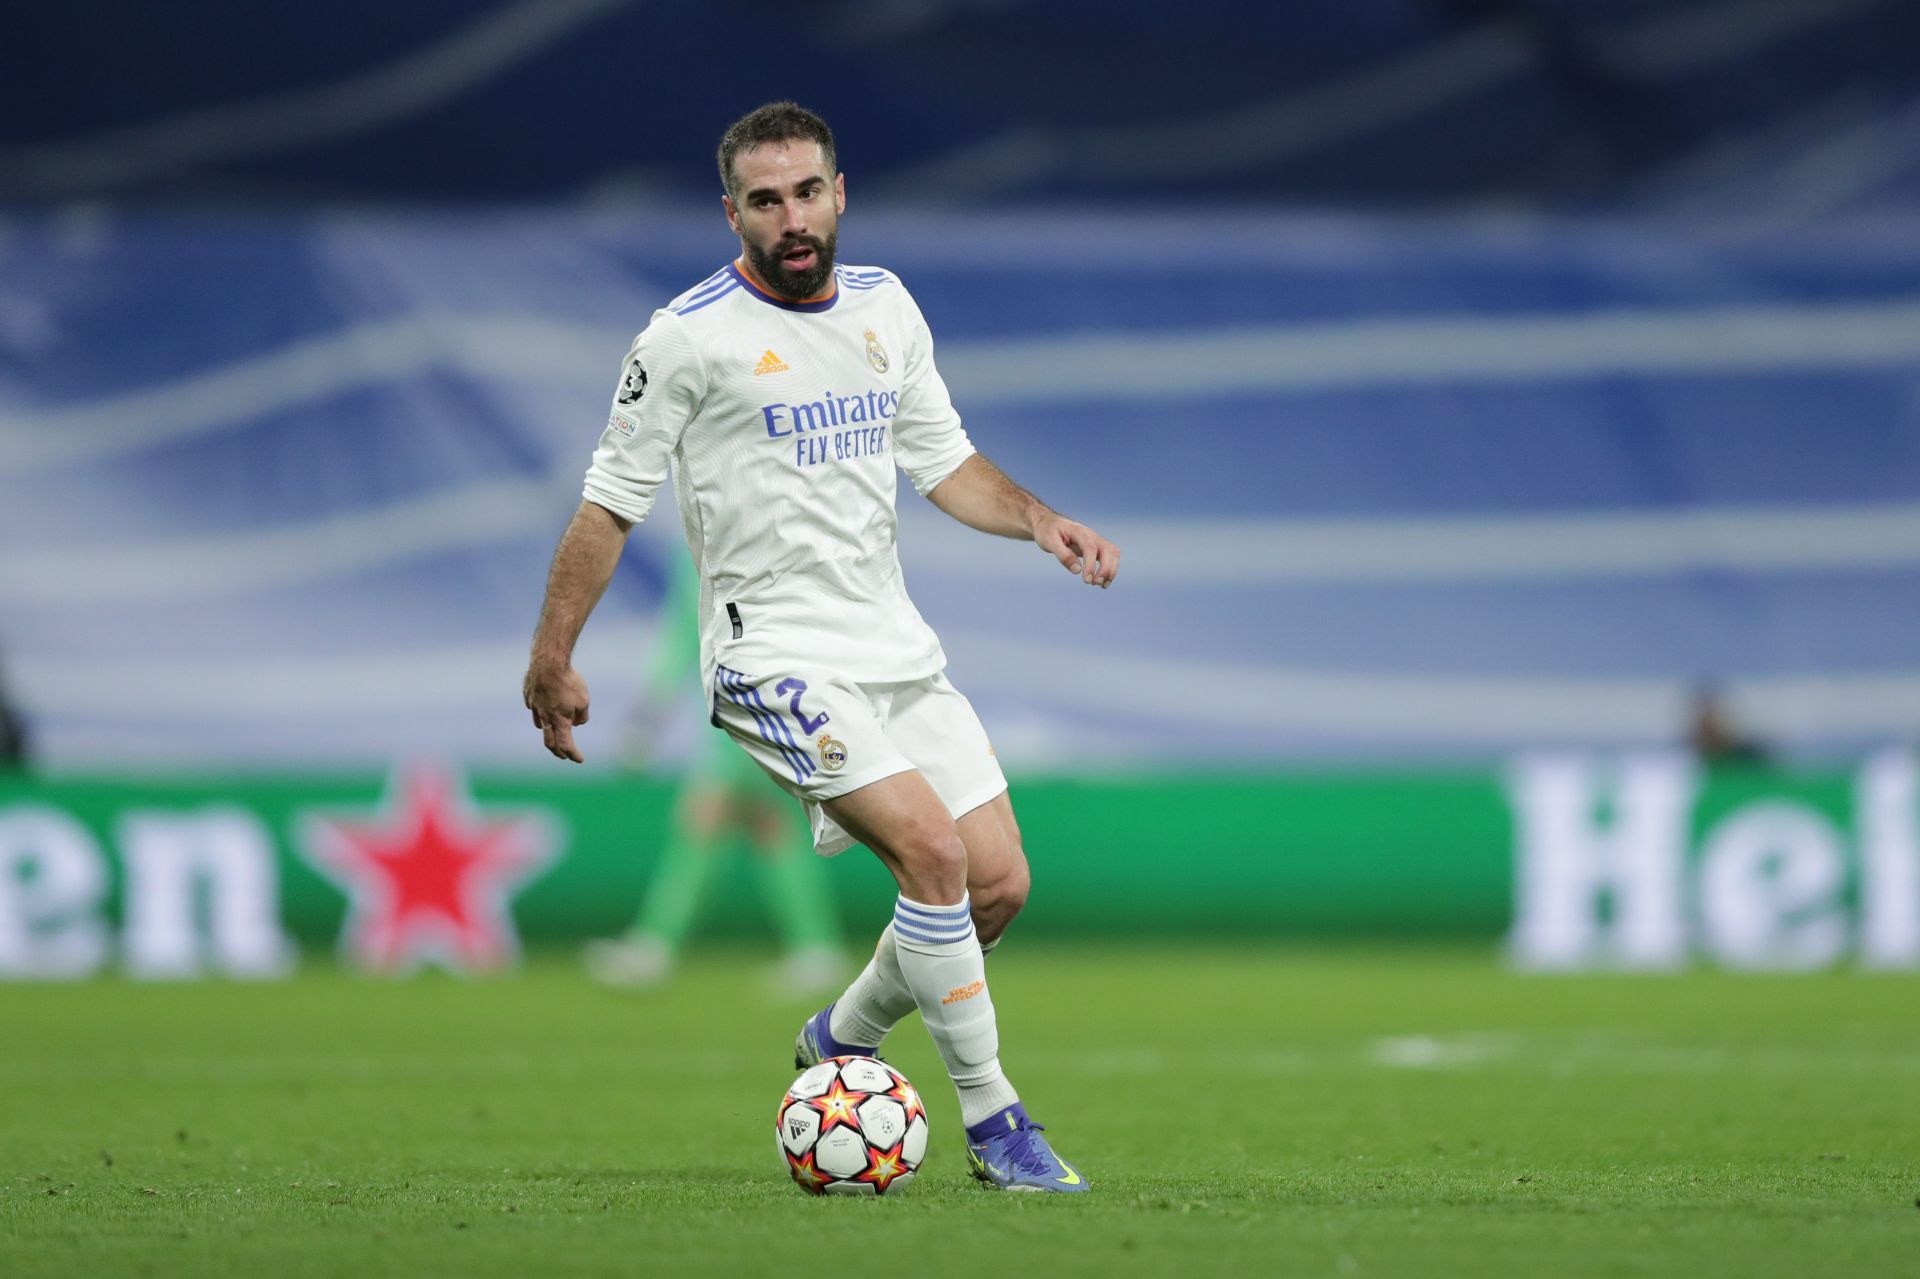 Dani Carvajal will have his task cut out